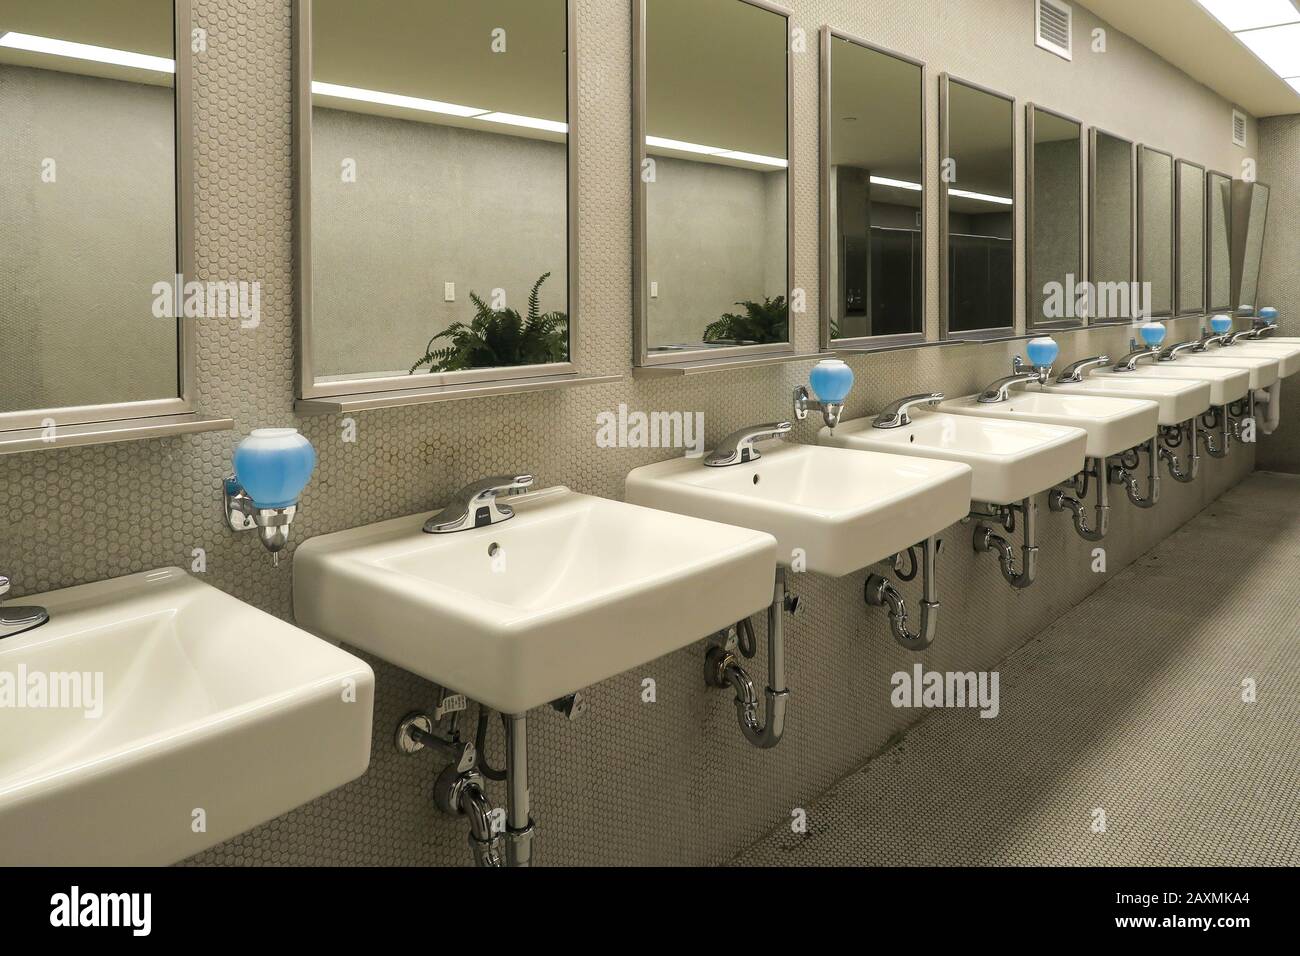 Sinks in a Large Public Restroom, USA Stock Photo